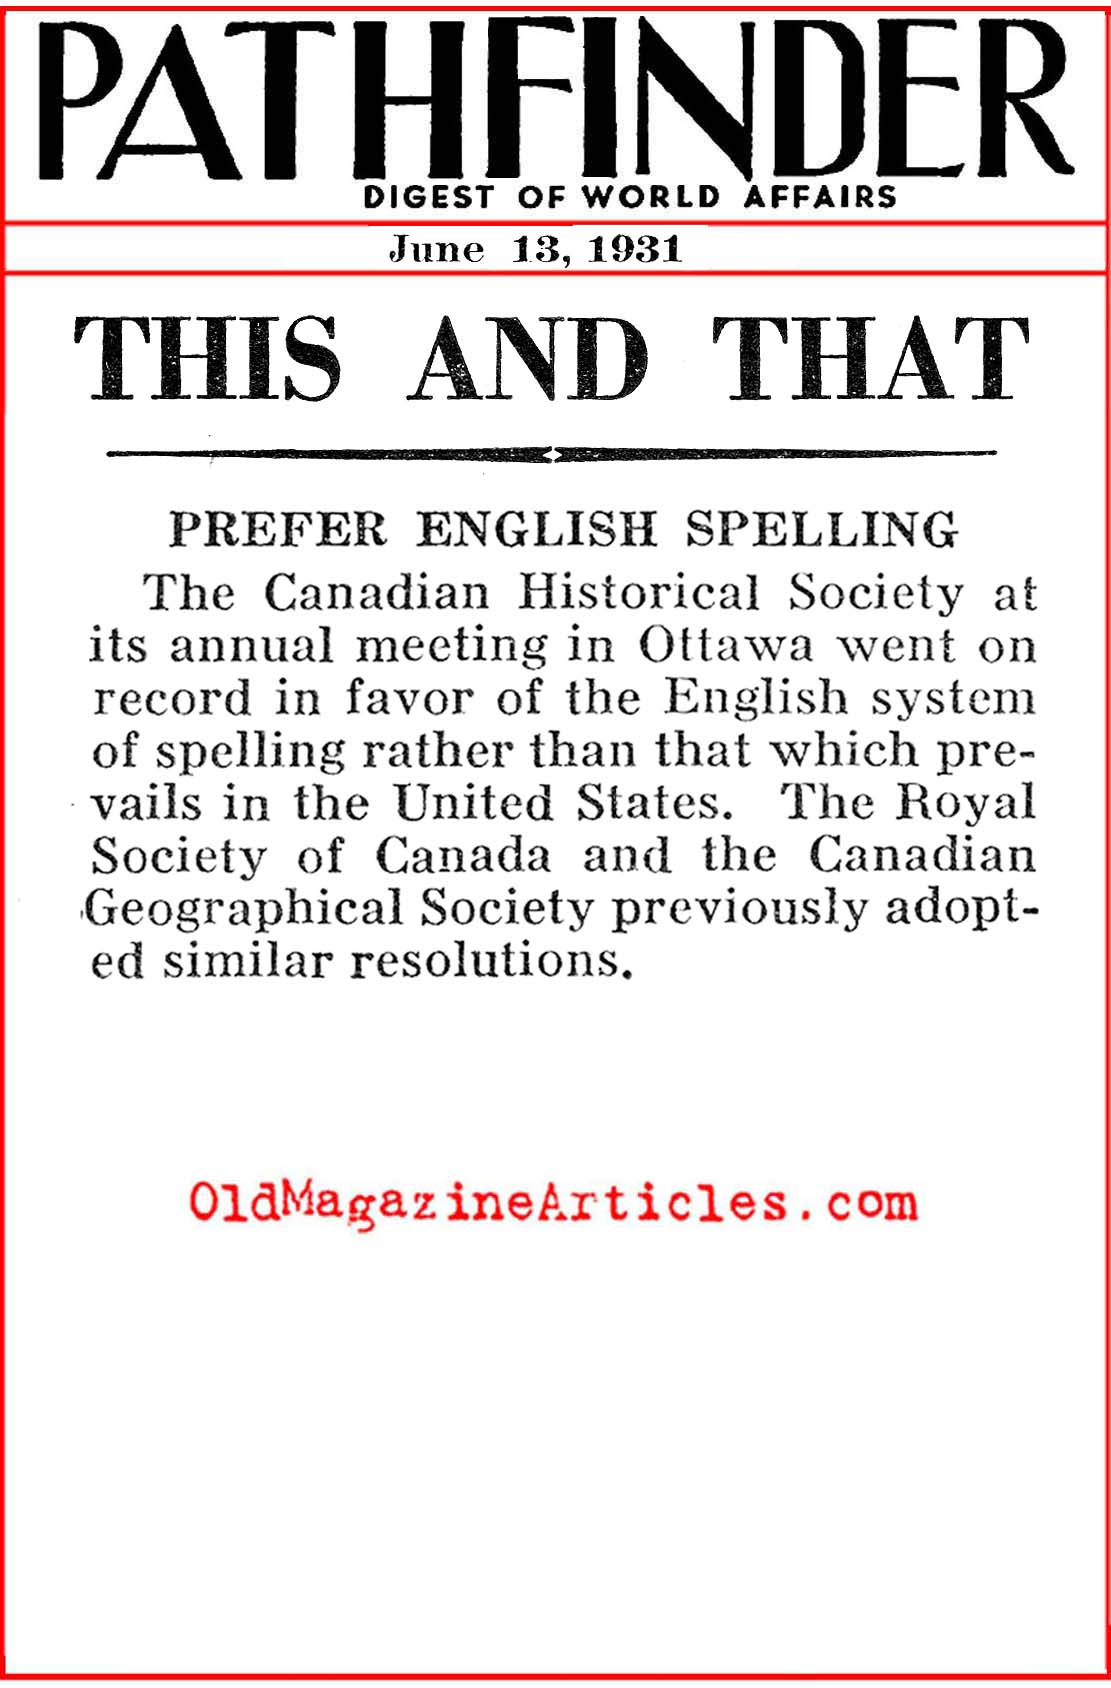 American Spelling Rejected by Canadians (Pathfinder Magazine, 1931)